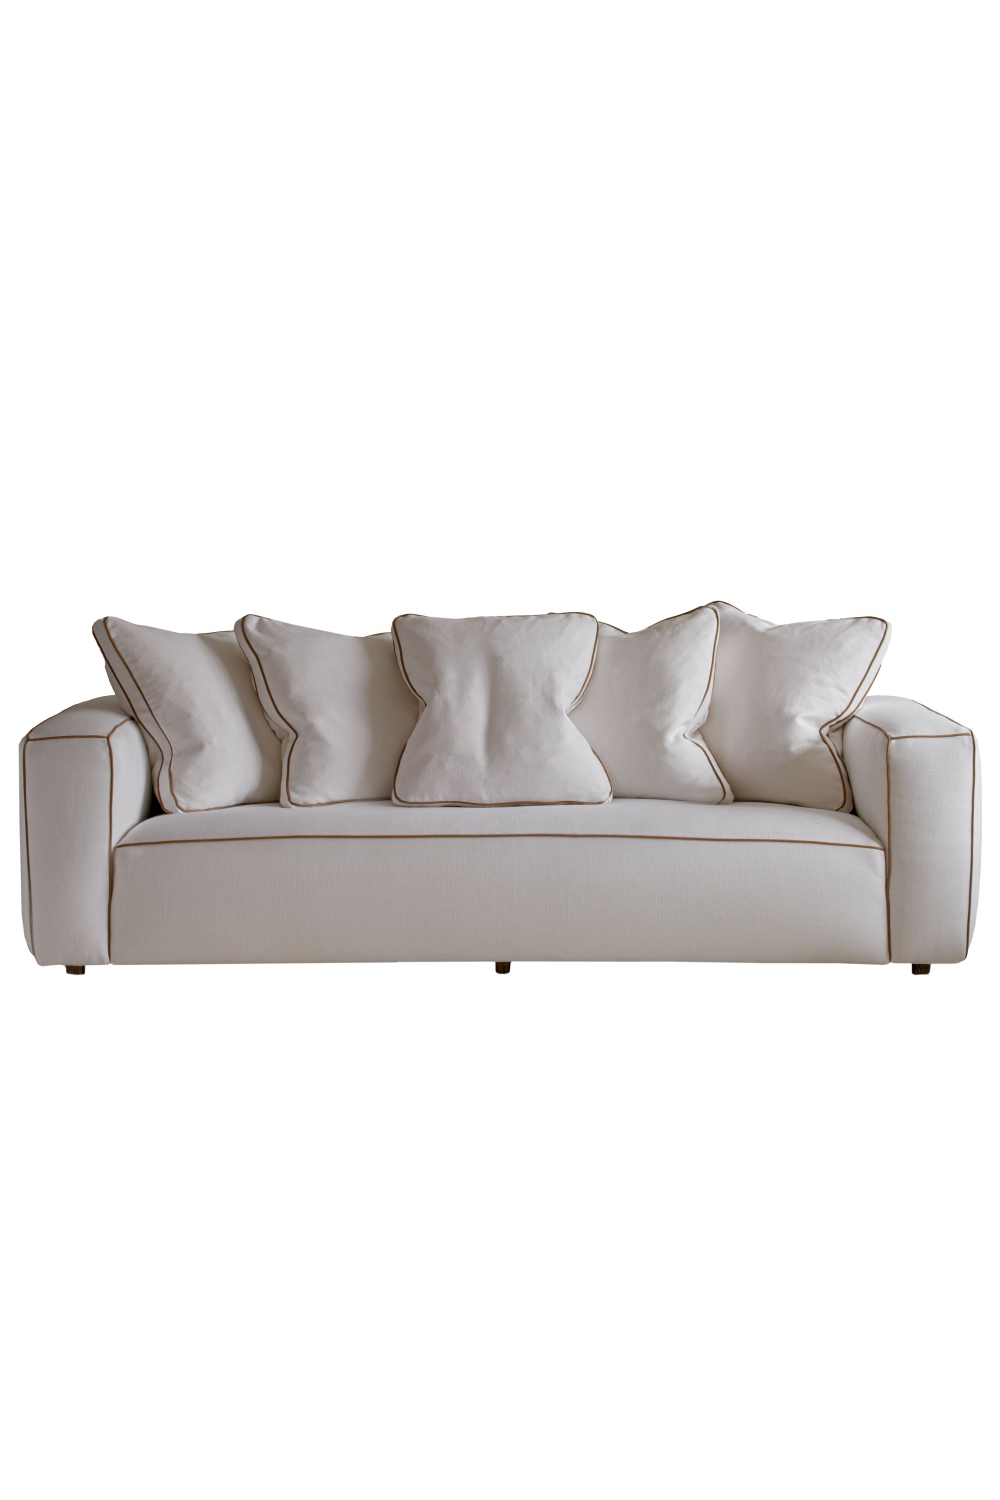 White Linen Sofa With Piping Andrew